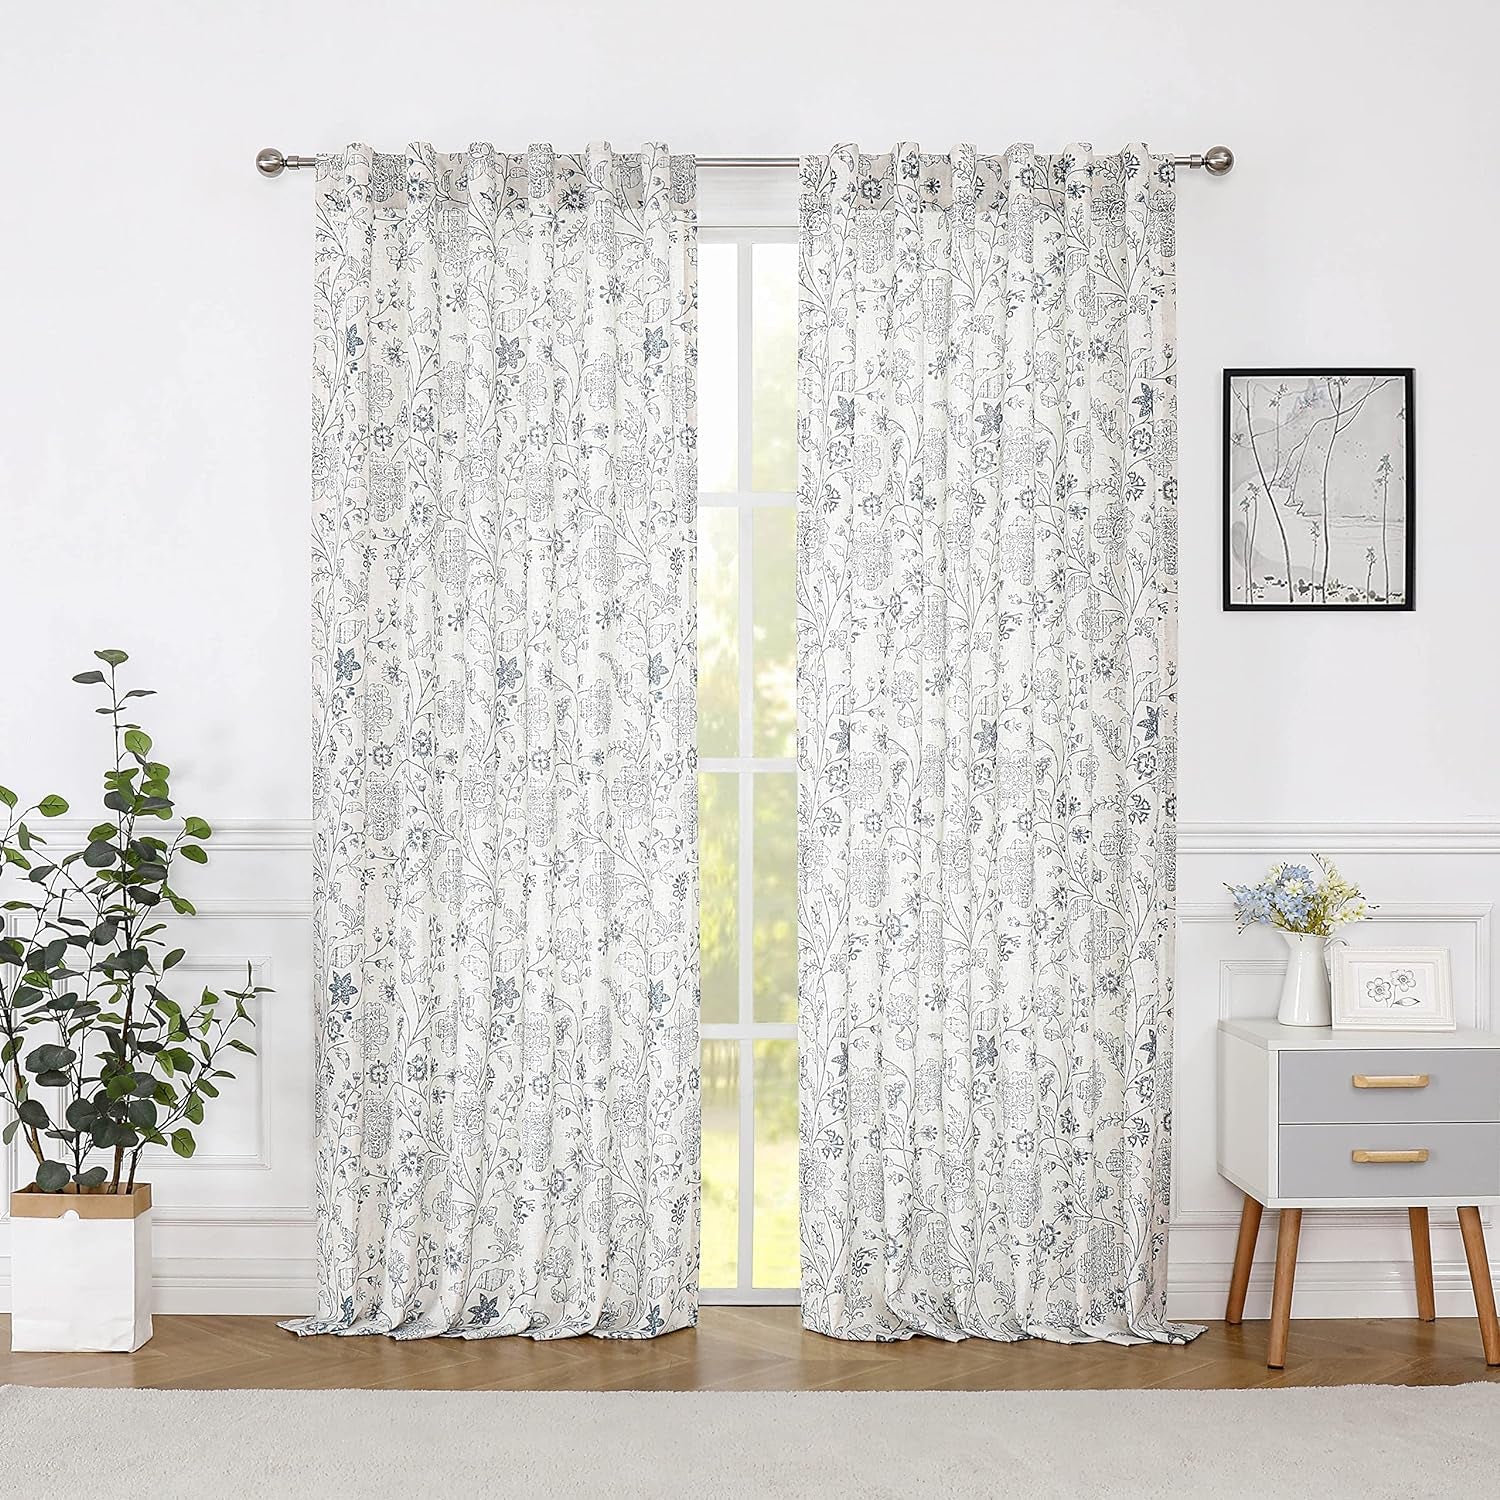 Vision Home Blue Floral Linen Curtains 84 Inch Farmhouse Botanical Print Light Filtering Window Curtains for Living Room Bedroom Rod Pocket Back Tab Navy Beige Semi Sheer Drapes 2 Panels 54" Wx84 L  Vision Home   